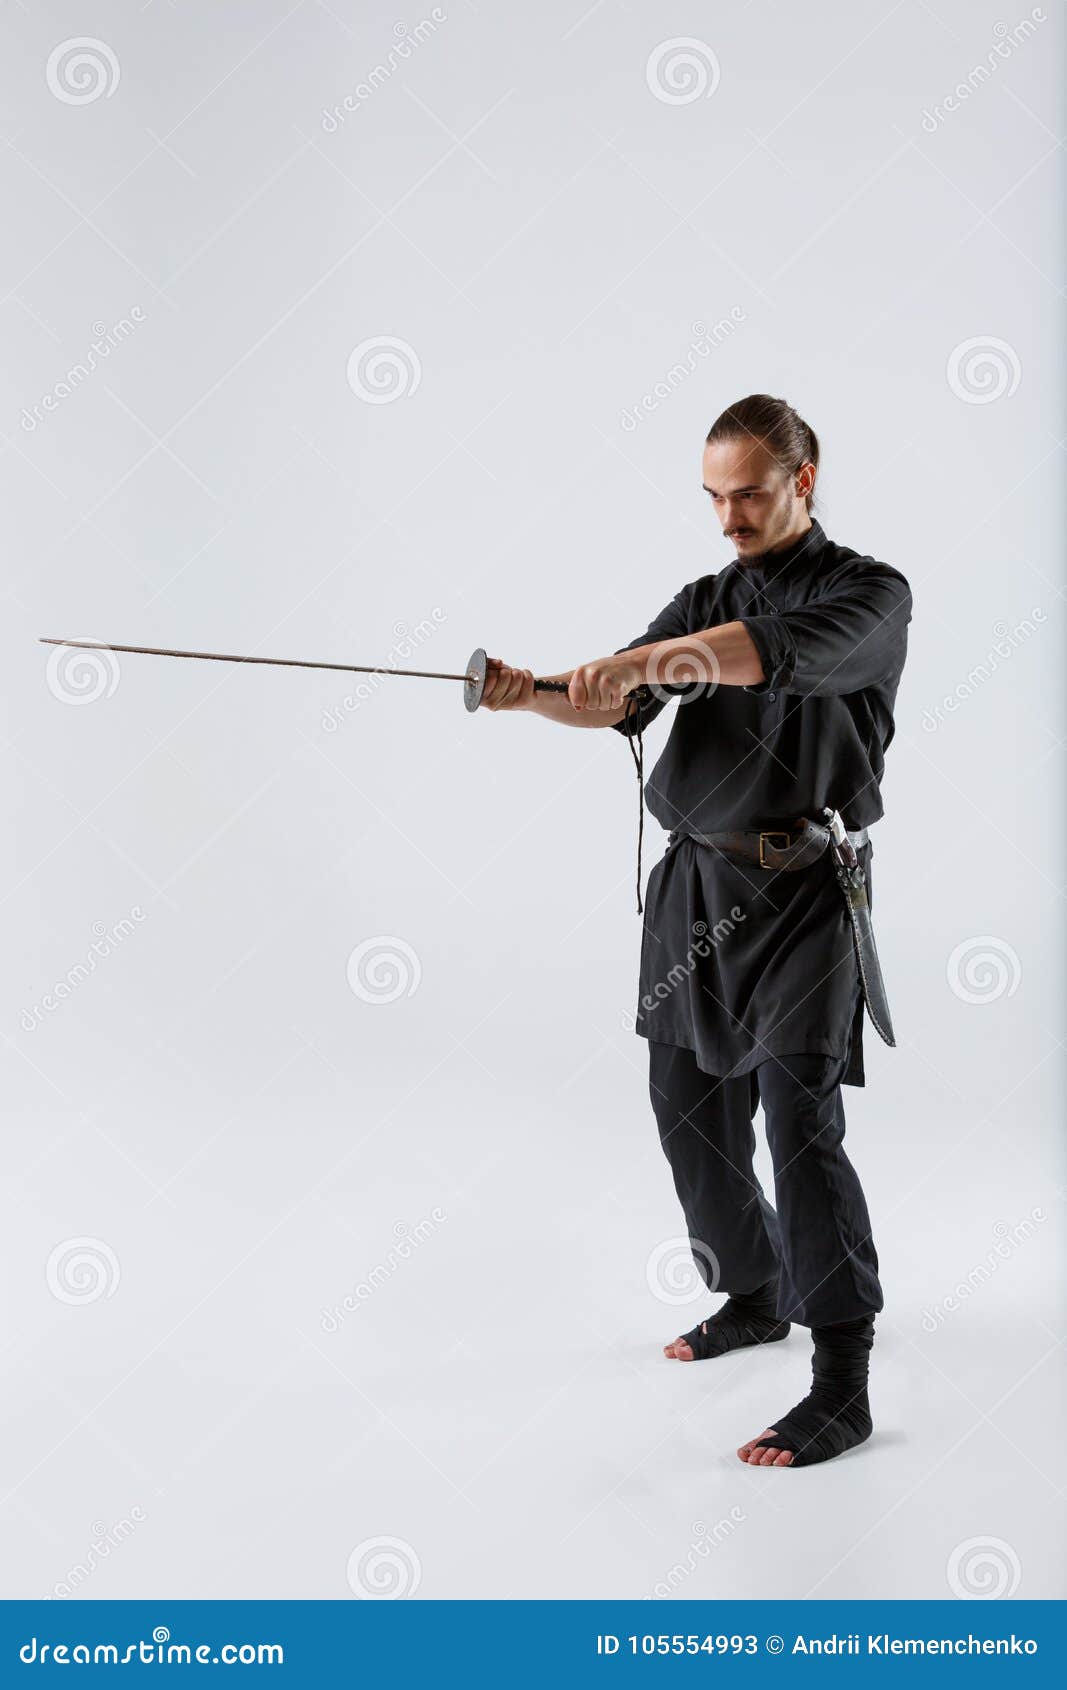 A Ninja Man Holding a Sword with Both Hands is Directed Forward Against a  Gray Background Stock Image - Image of flexibility, japanese: 105554993